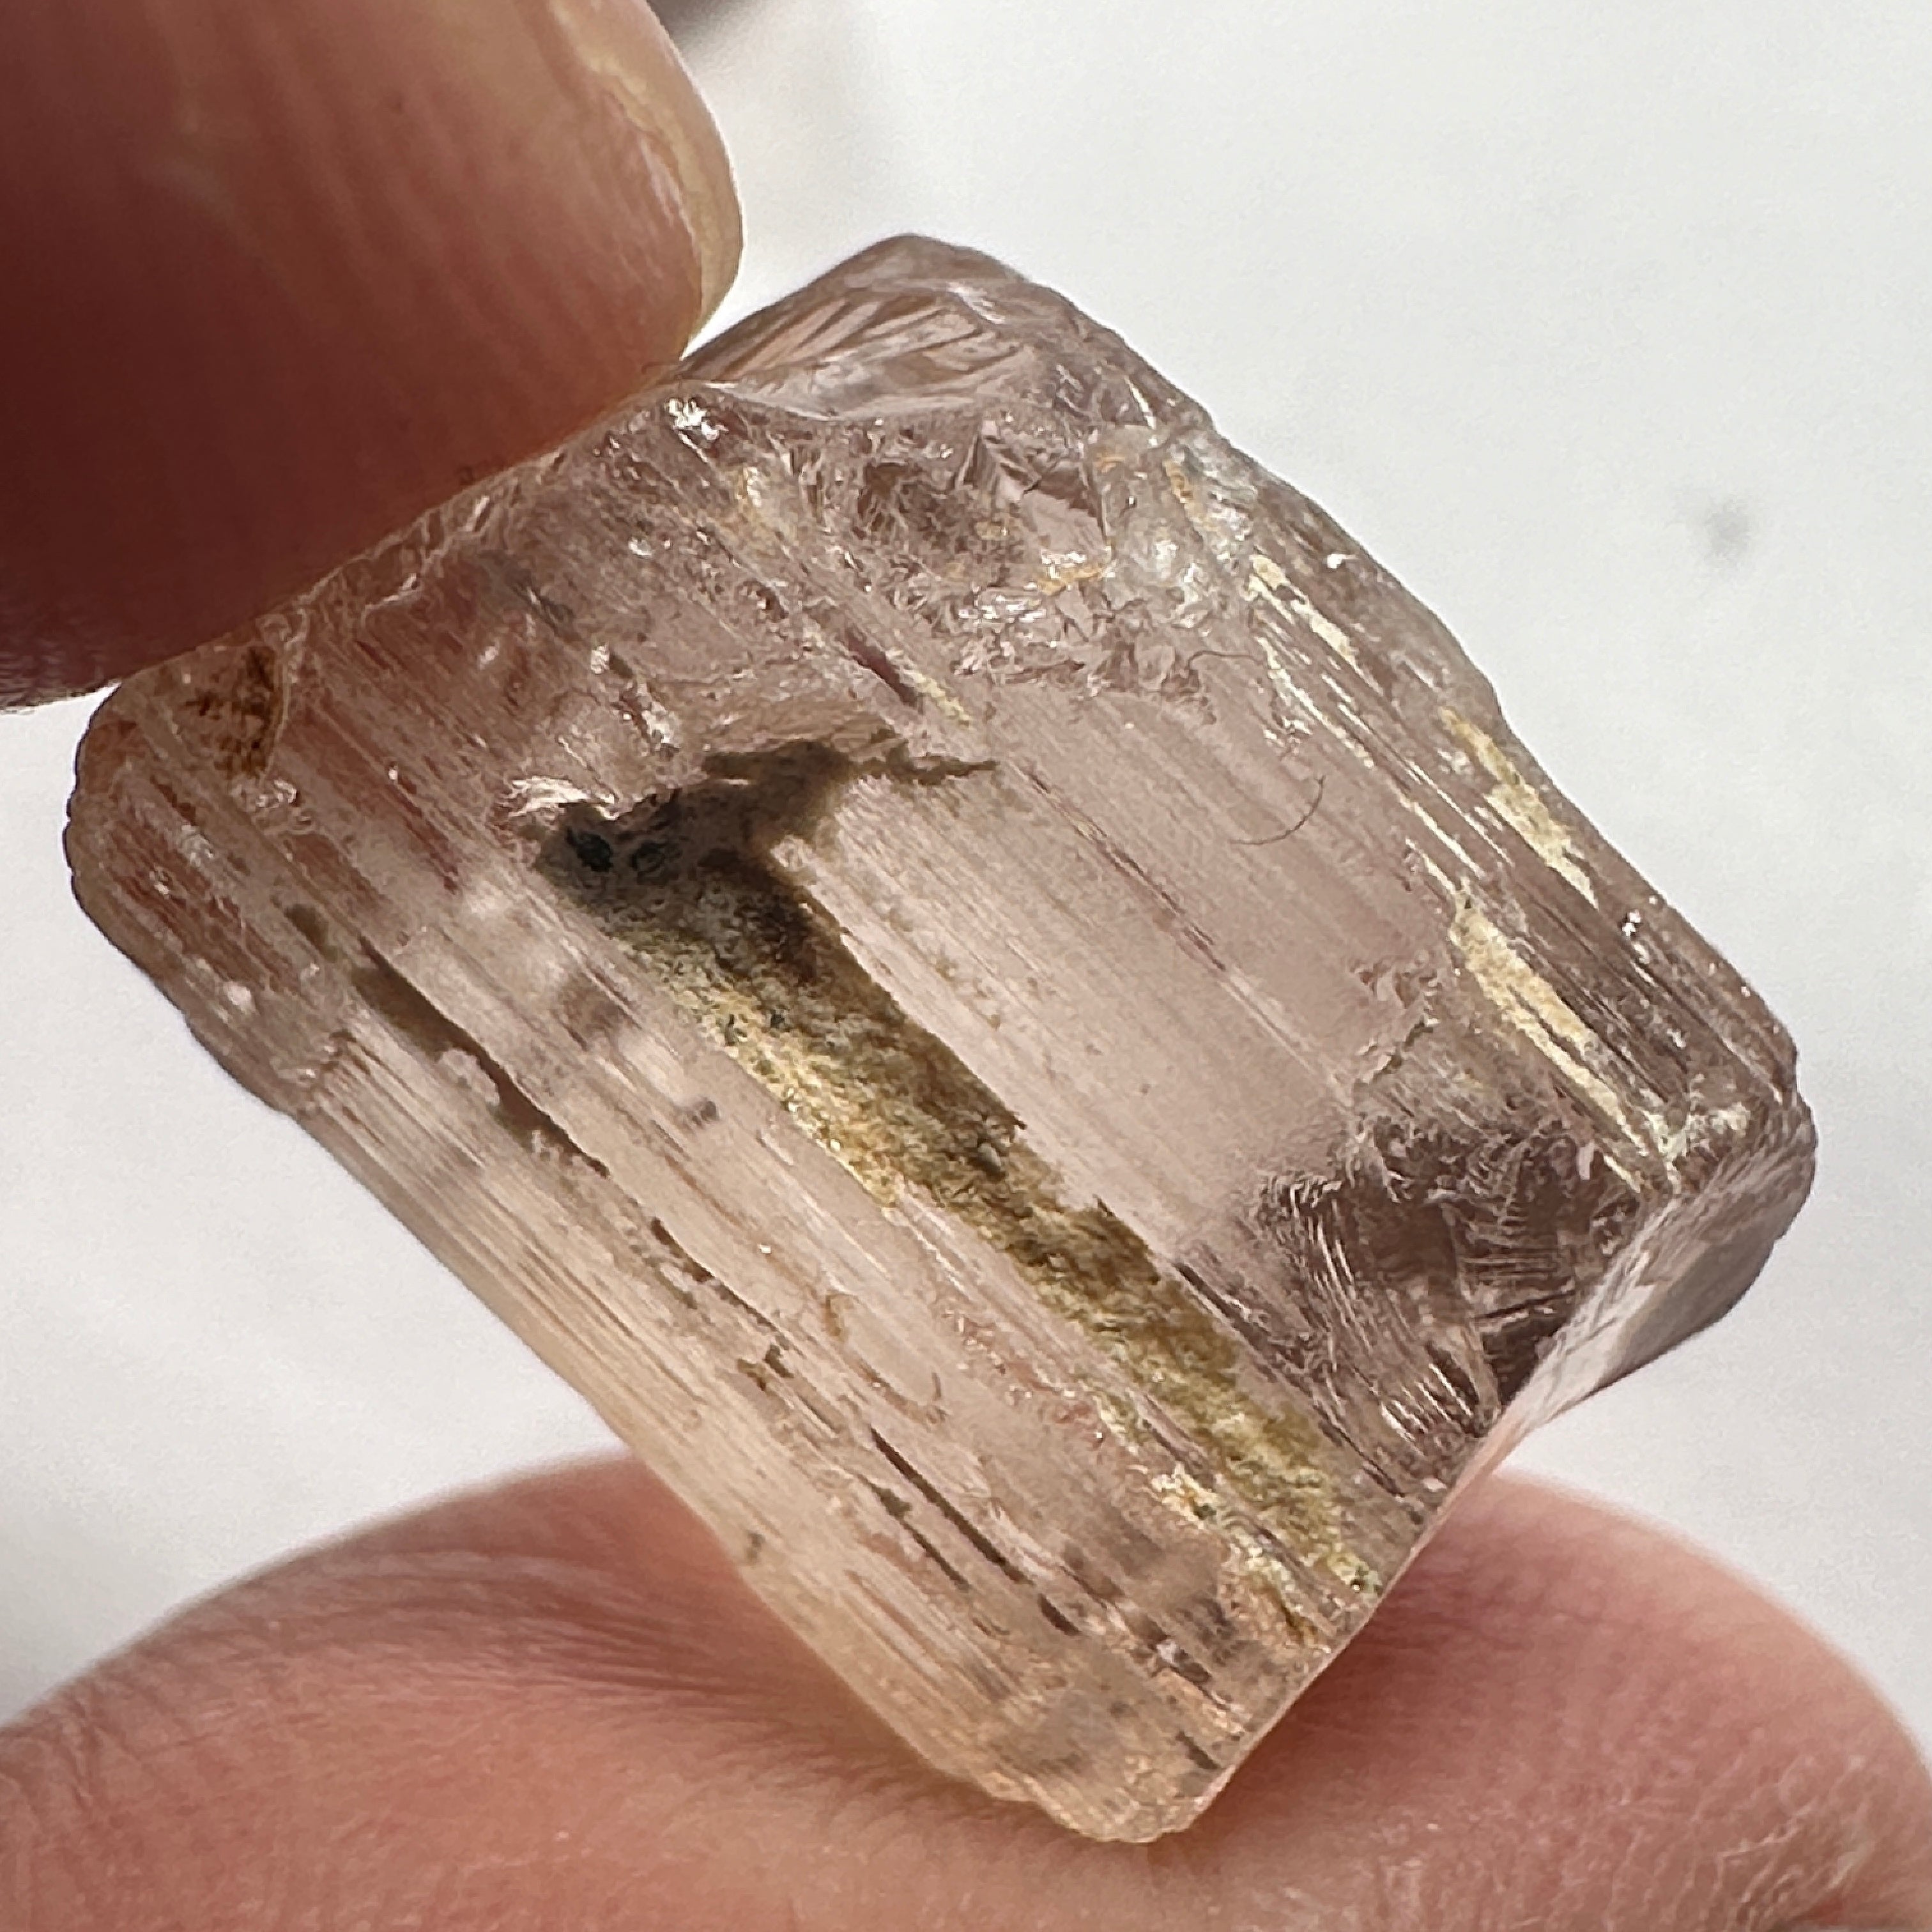 24.31ct Very Rare, Peach Pink Scapolite, Tanzania, Untreated Unheated, VVS-IF (flawless)